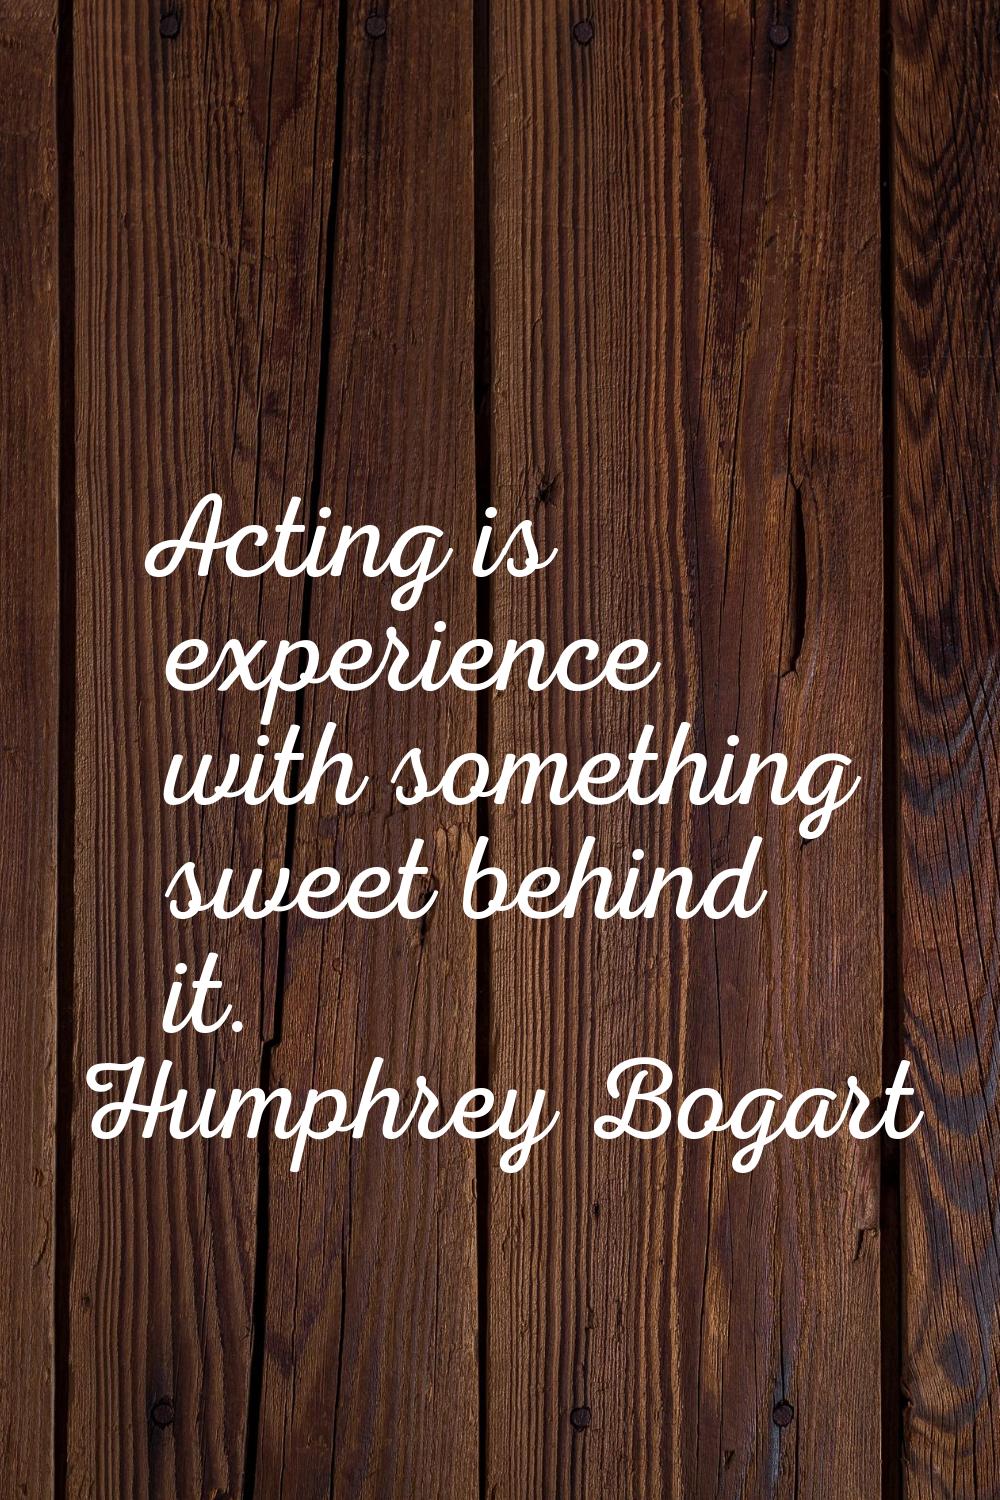 Acting is experience with something sweet behind it.